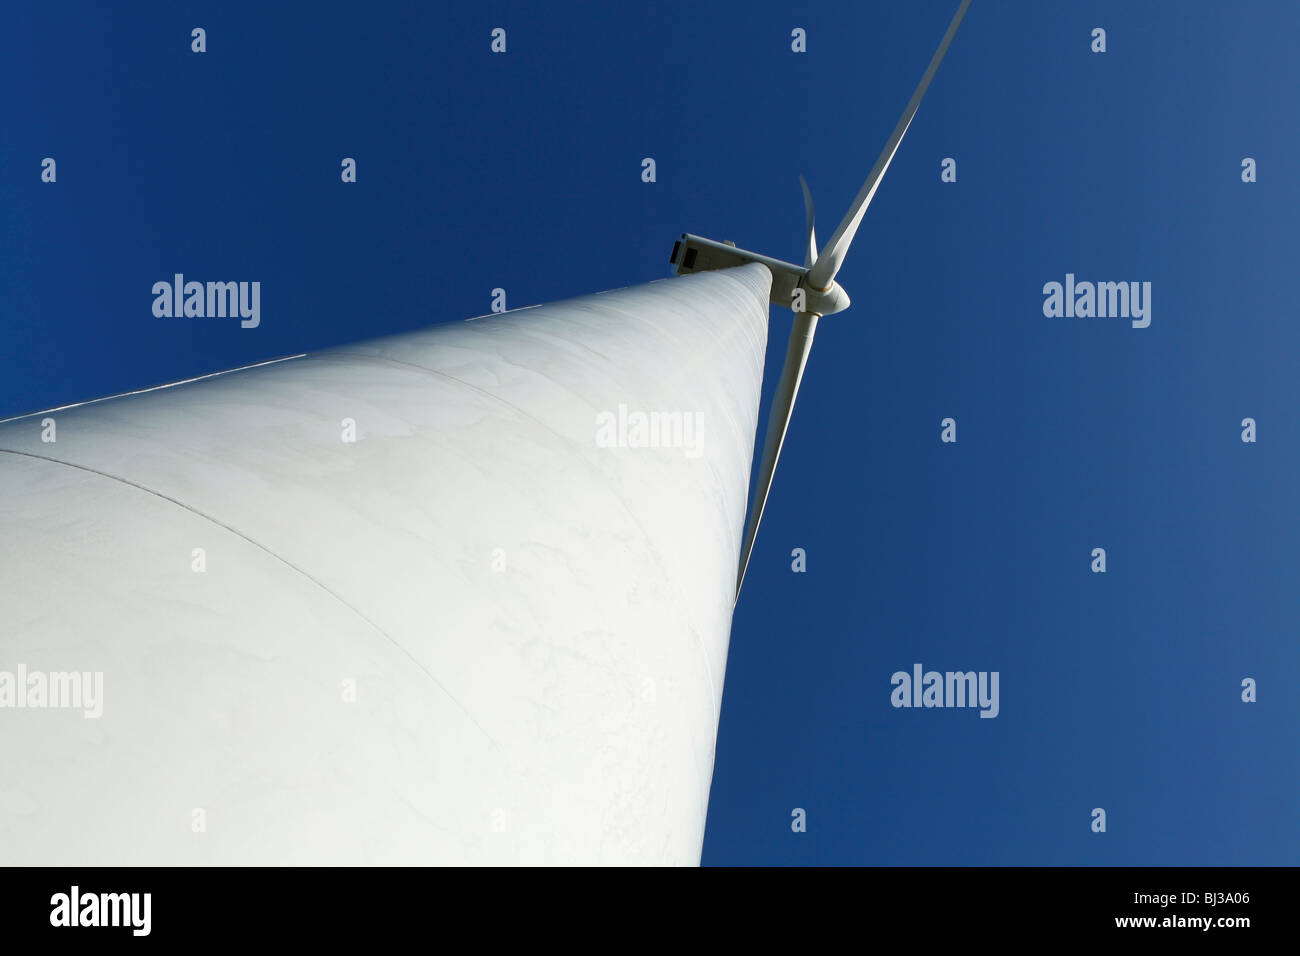 A wind turbine against a clear blue sky. Great for energy and environment themes. Stock Photo